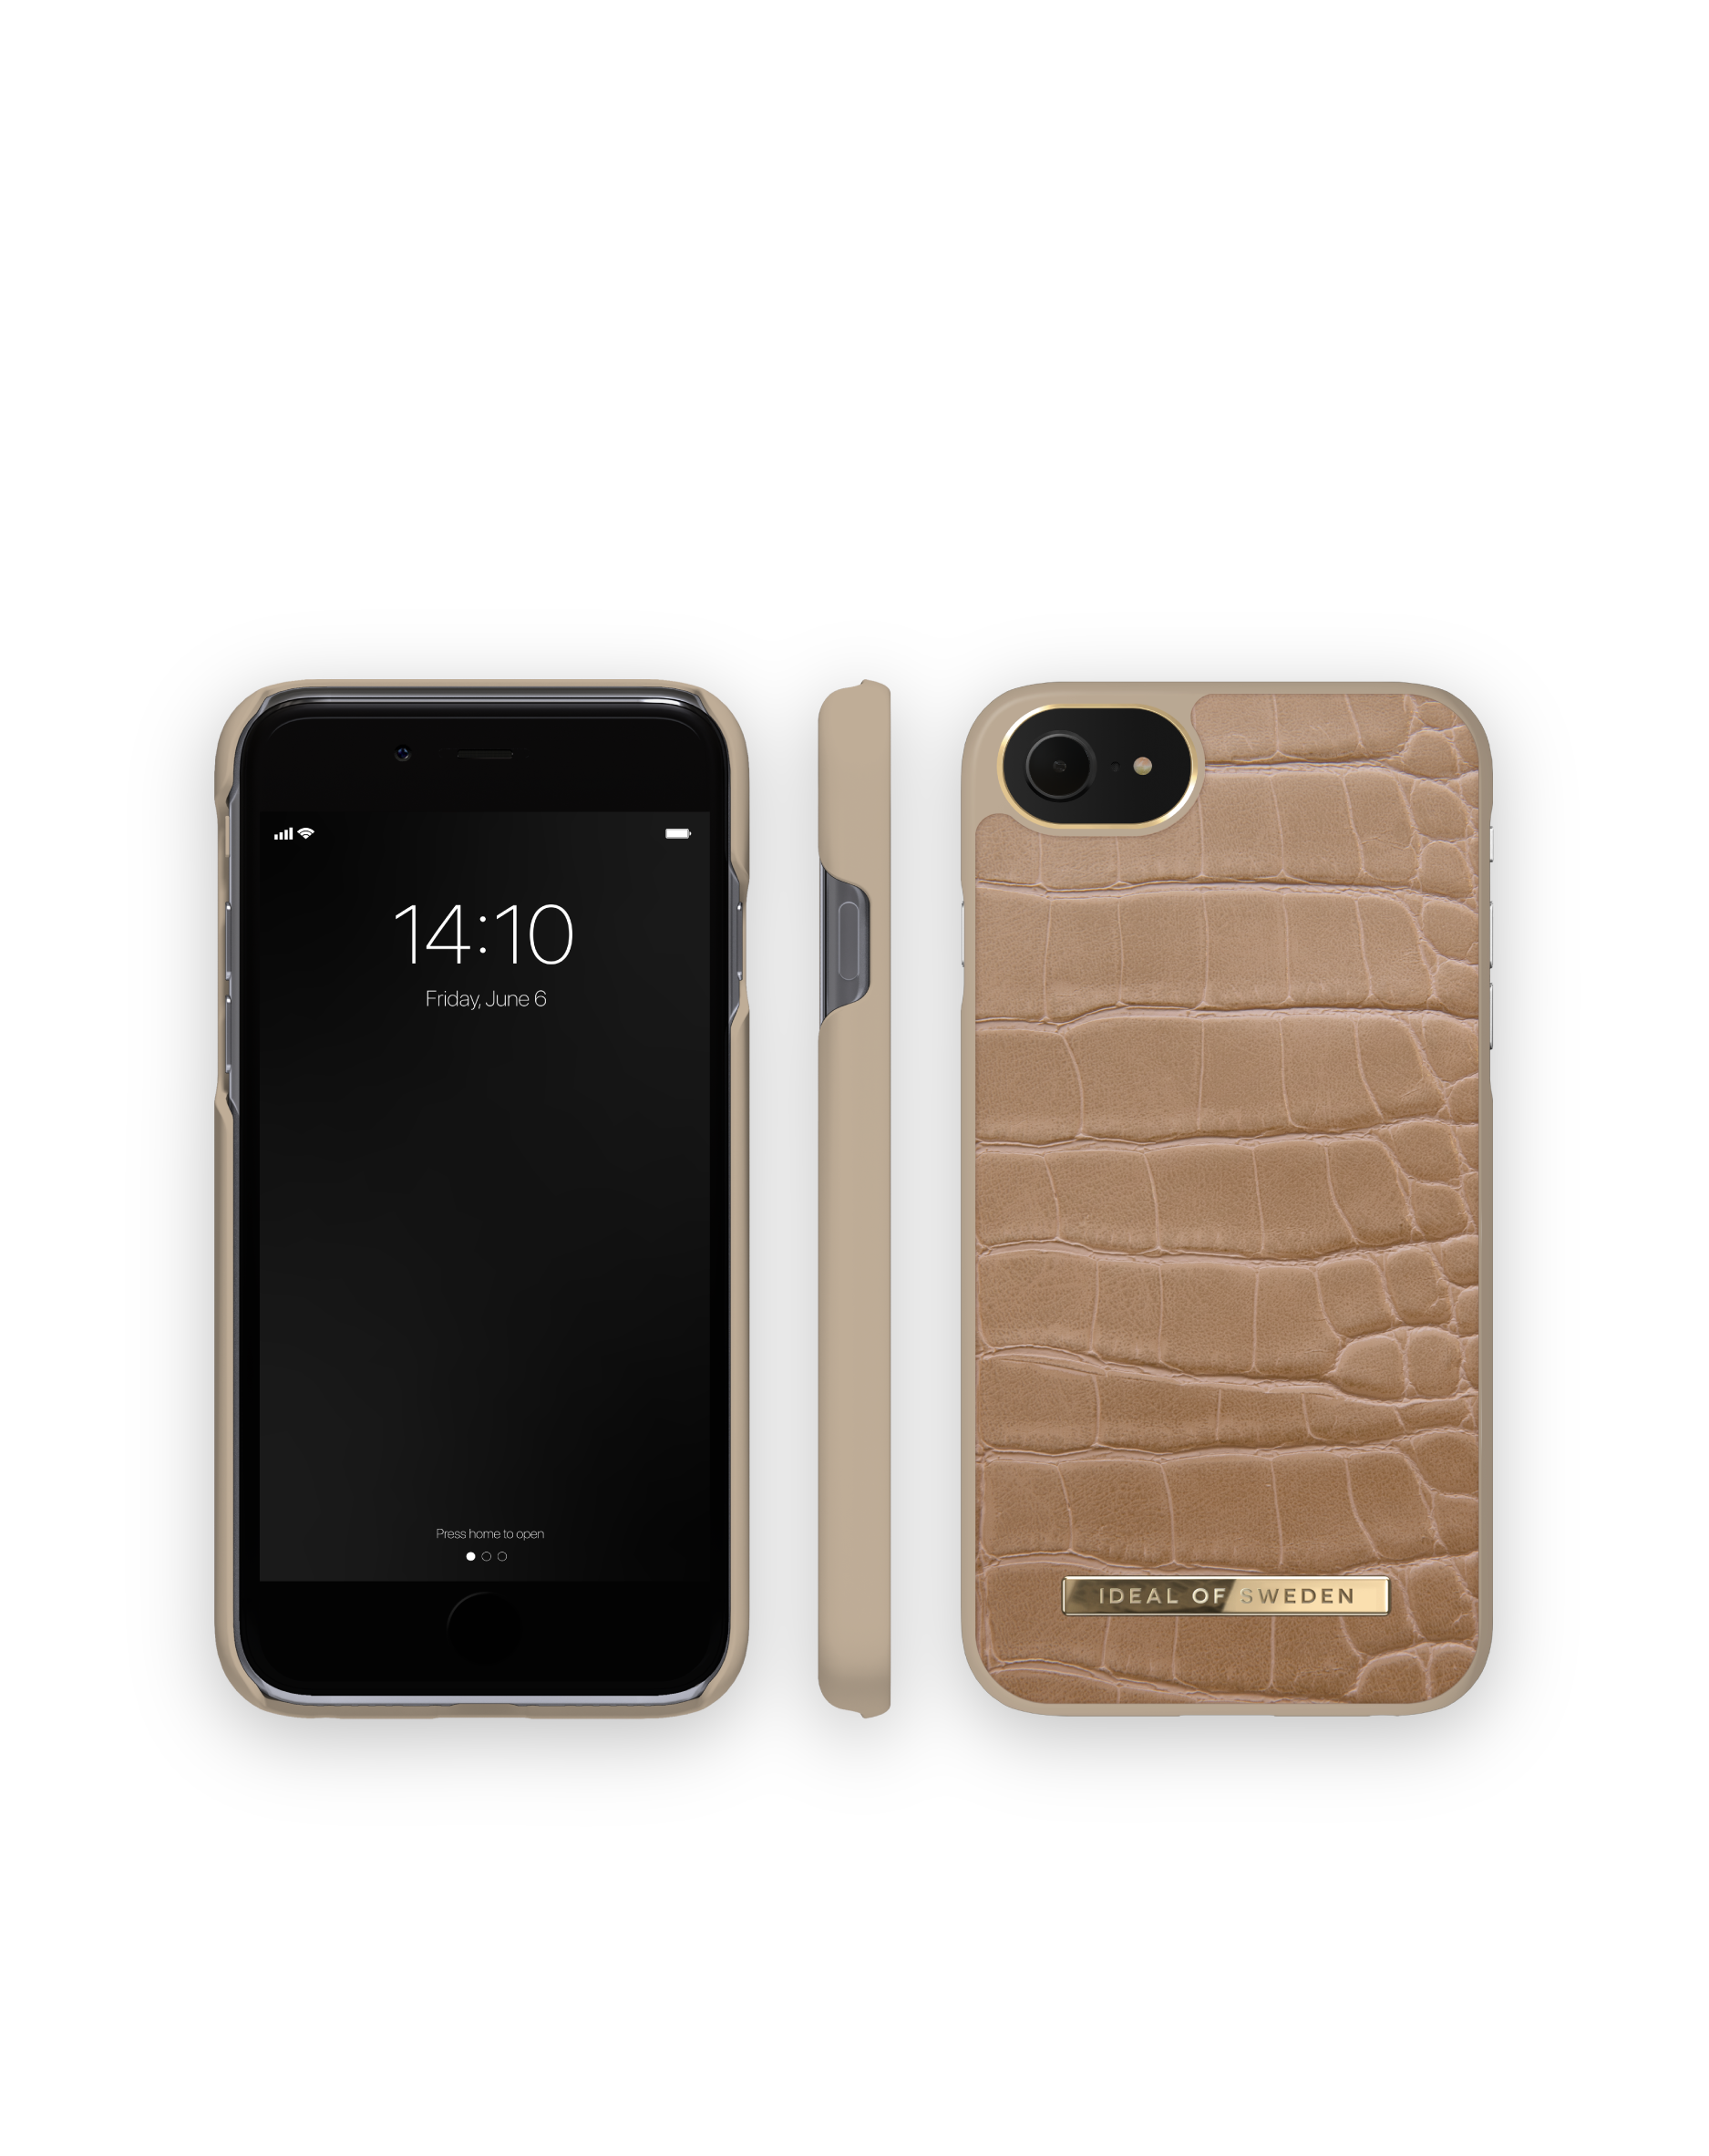 Camel SWEDEN Apple, IDEAL IDACAW21-I7-325, Croco iPhone 8/7/6/6s/SE, OF Backcover,